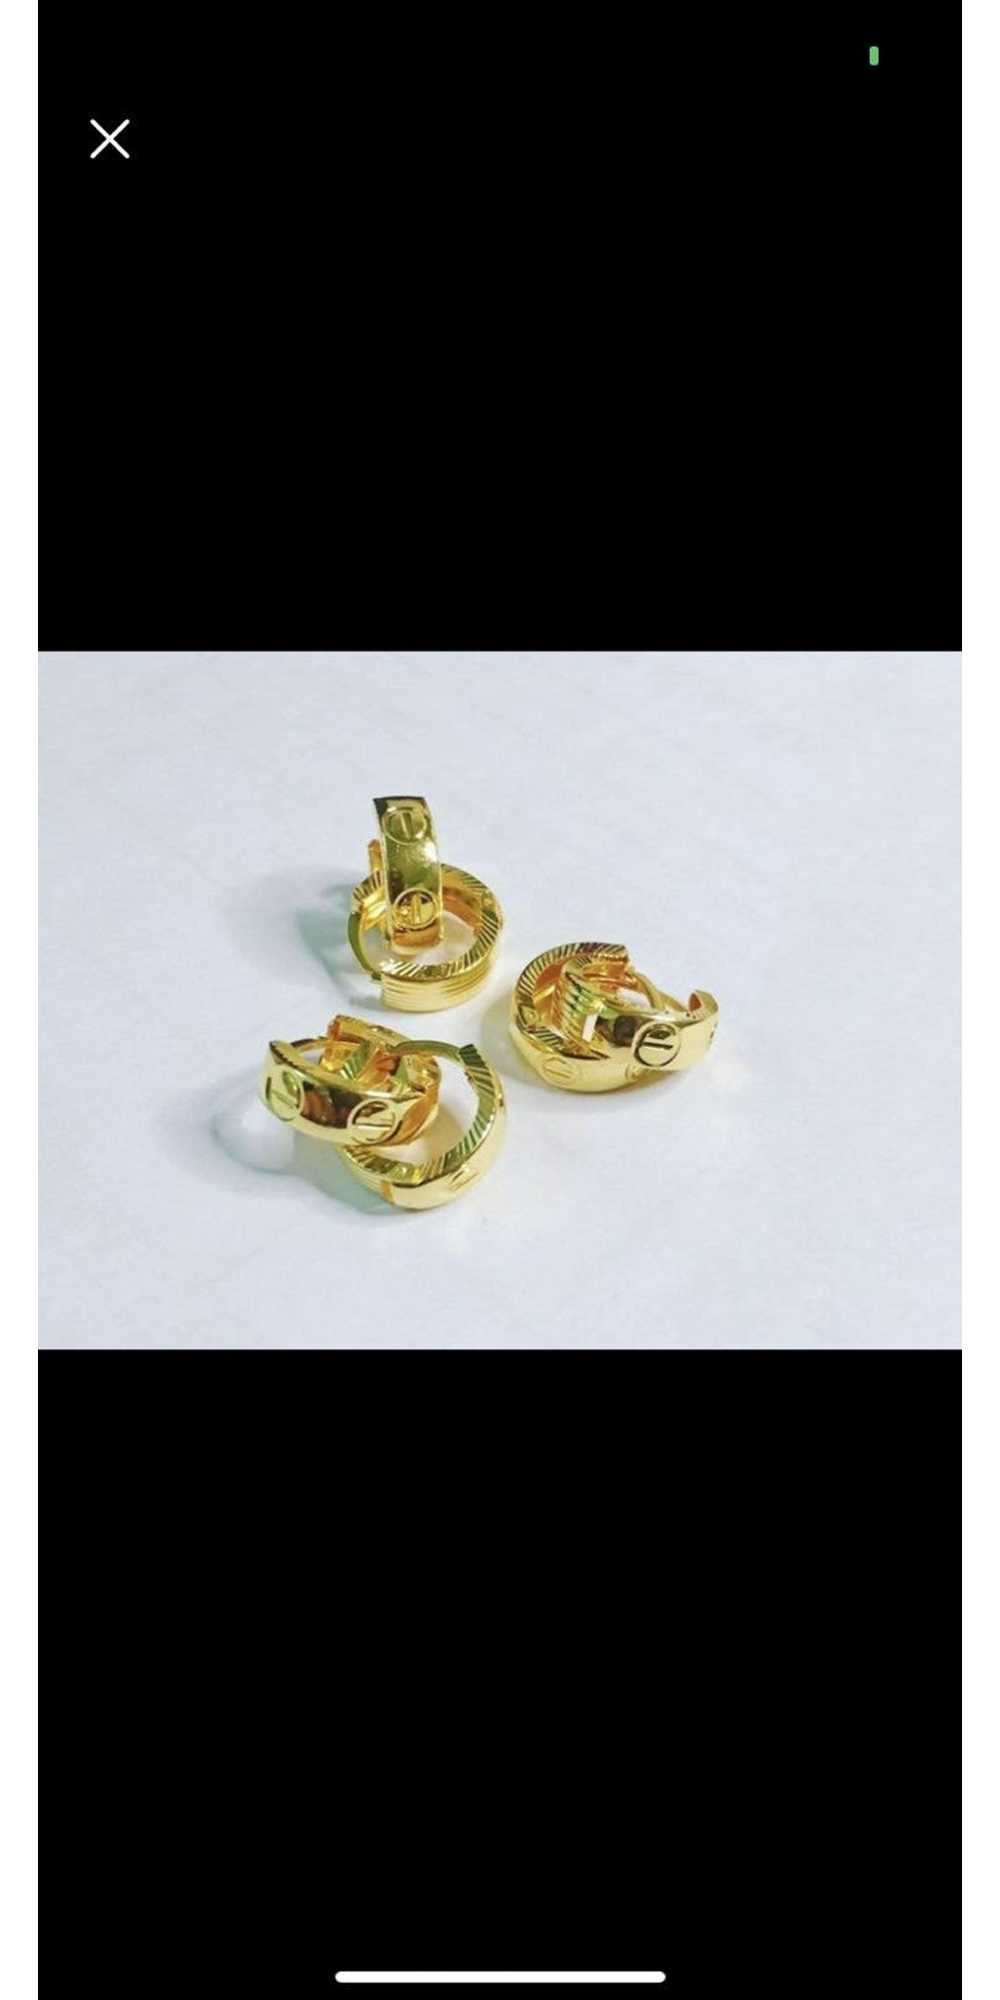 Gold Pure solid gold 916 ear ring 22k 2.64grams - image 3